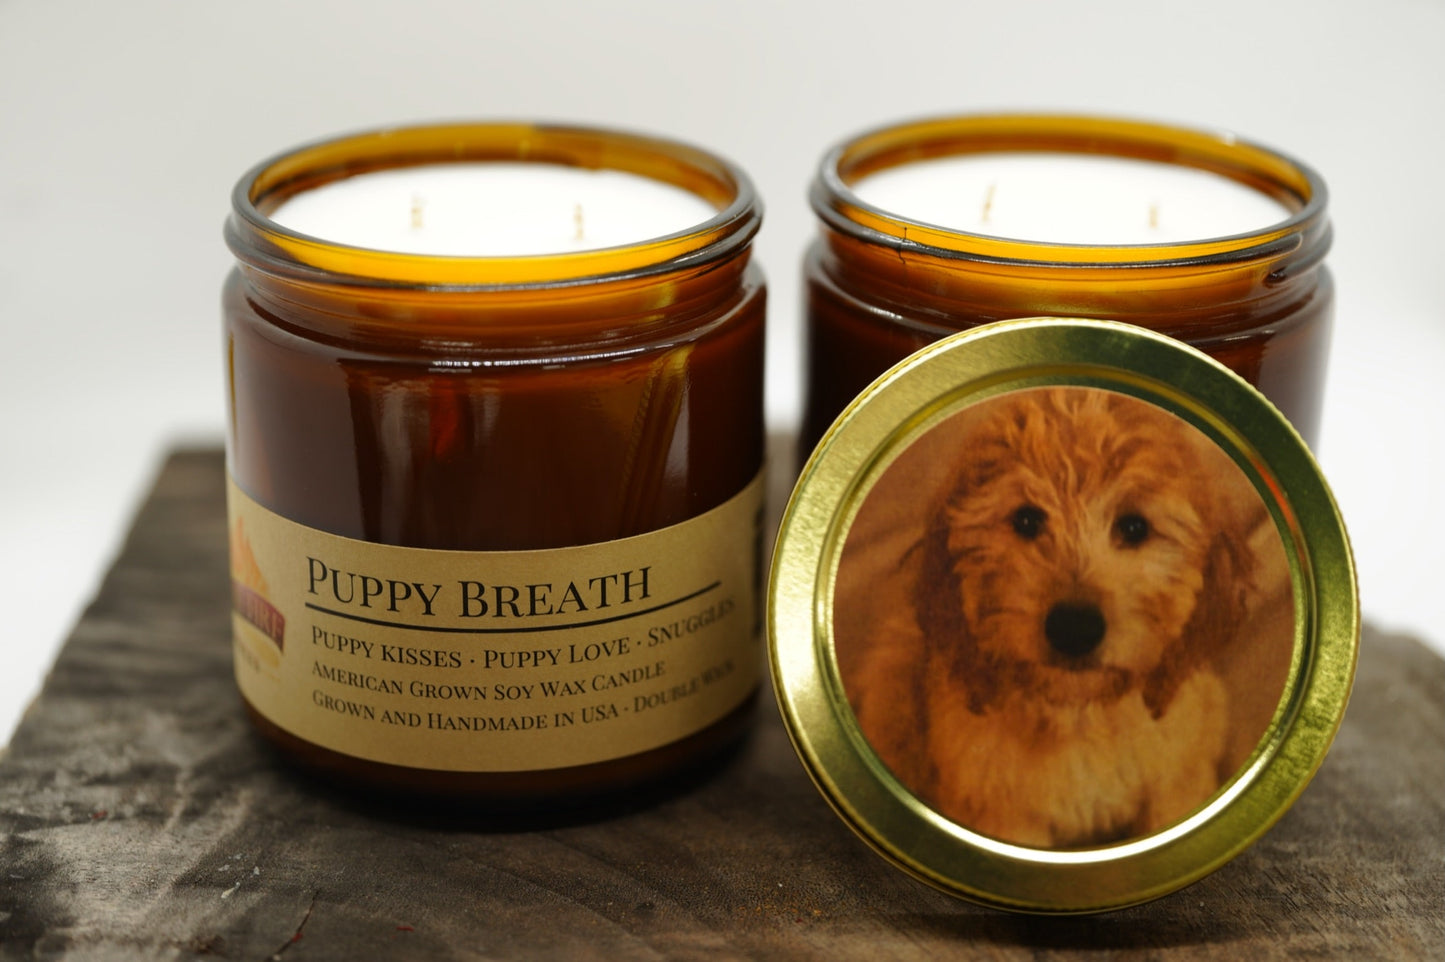 Puppy Breath Soy Candle | 16 oz Double Wick Amber Apothecary Jar